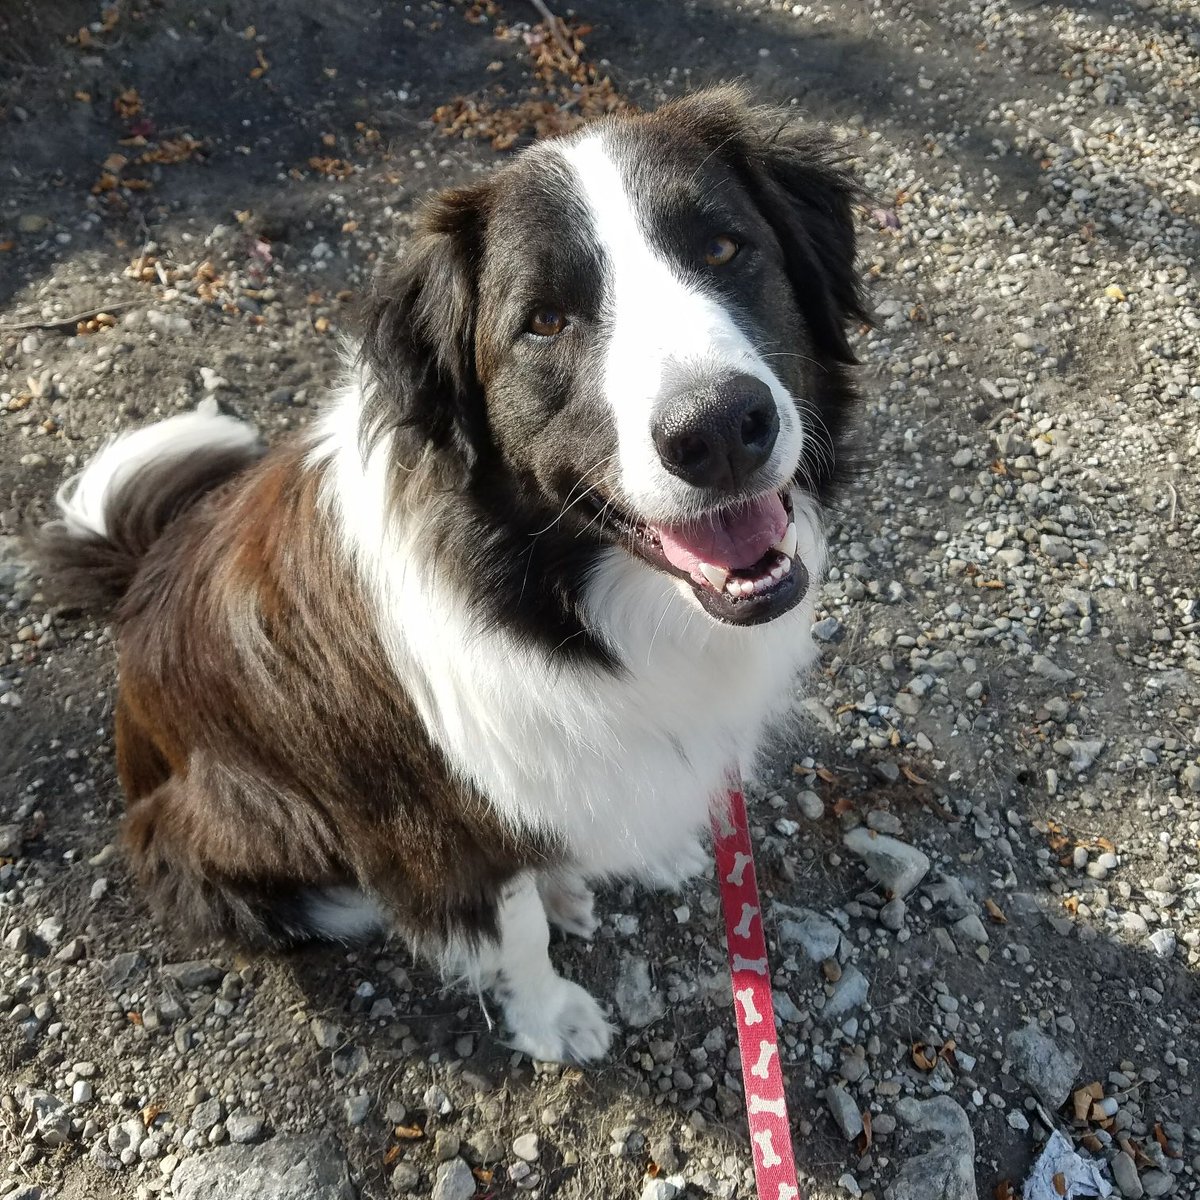 pyrenees and border collie mix